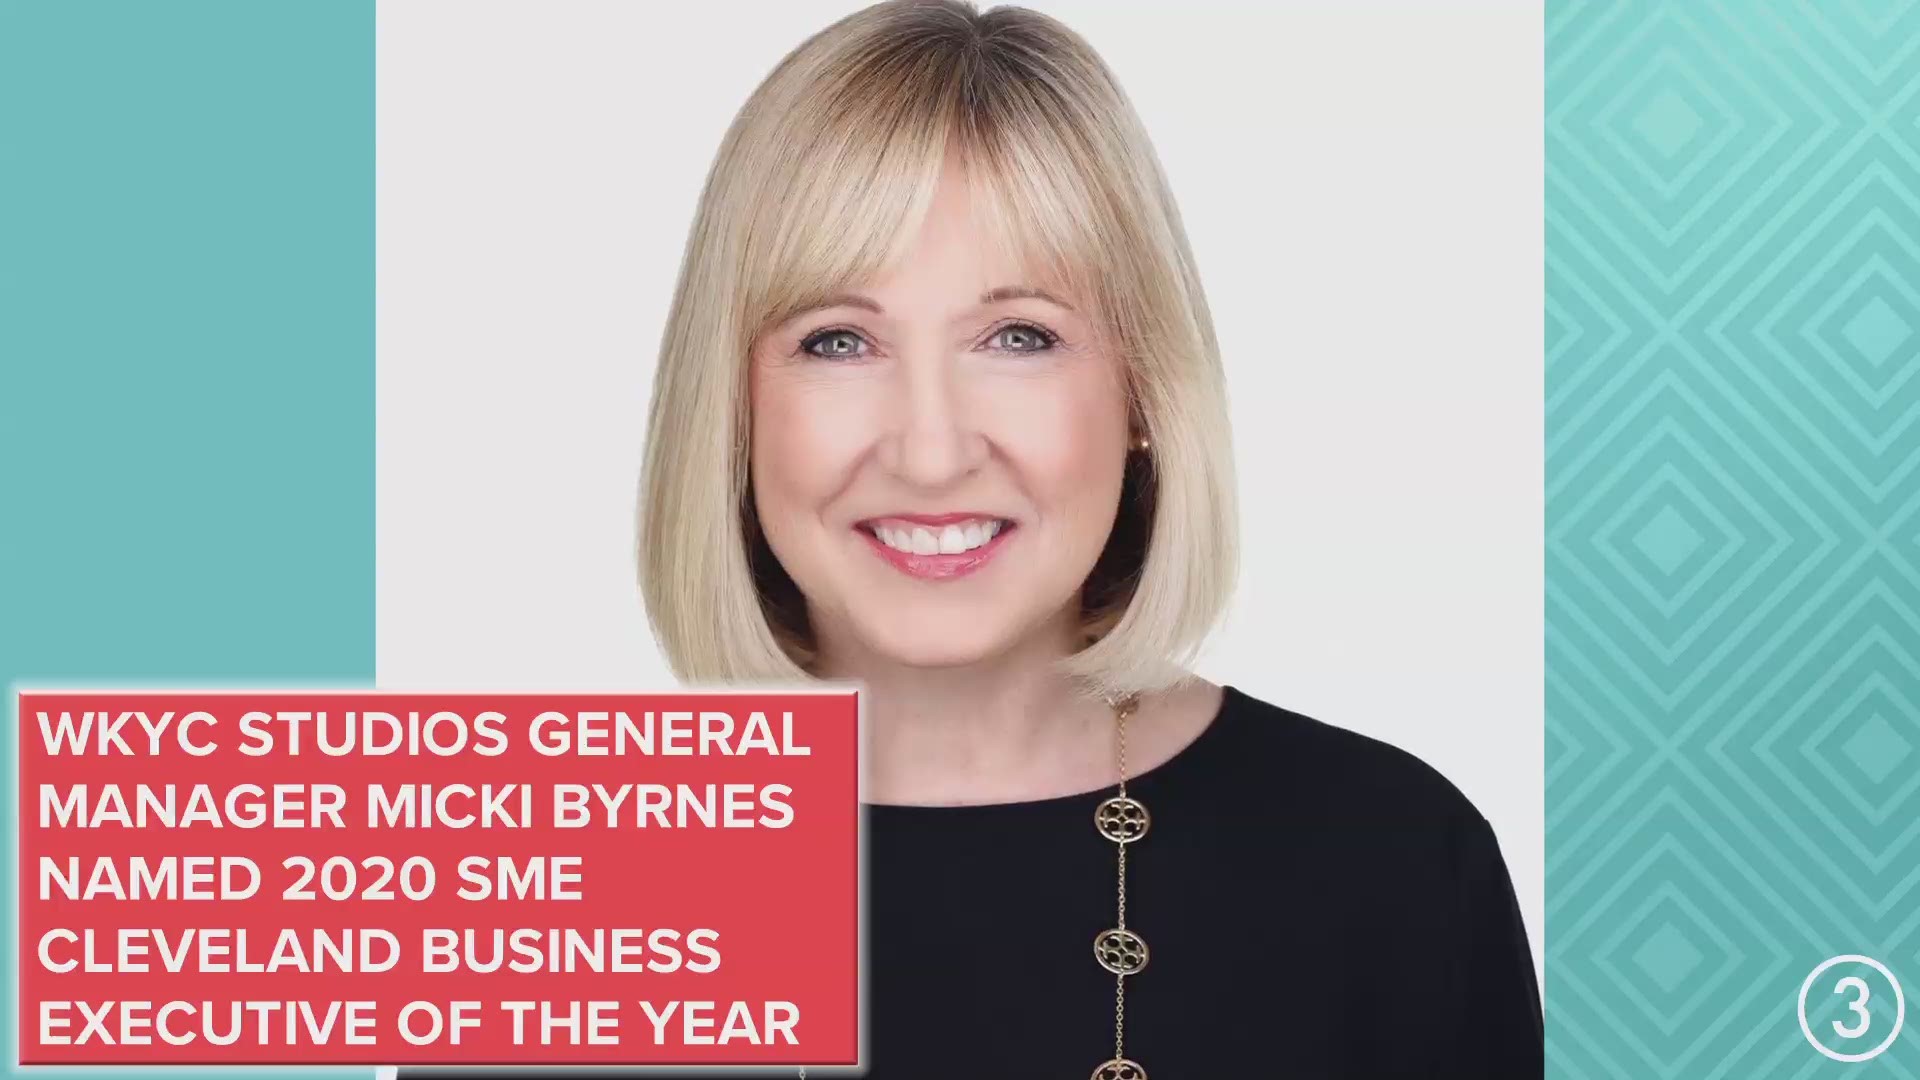 Micki Byrnes named 2020 SME Cleveland Business Executive of the year.  Congratulations, Micki!